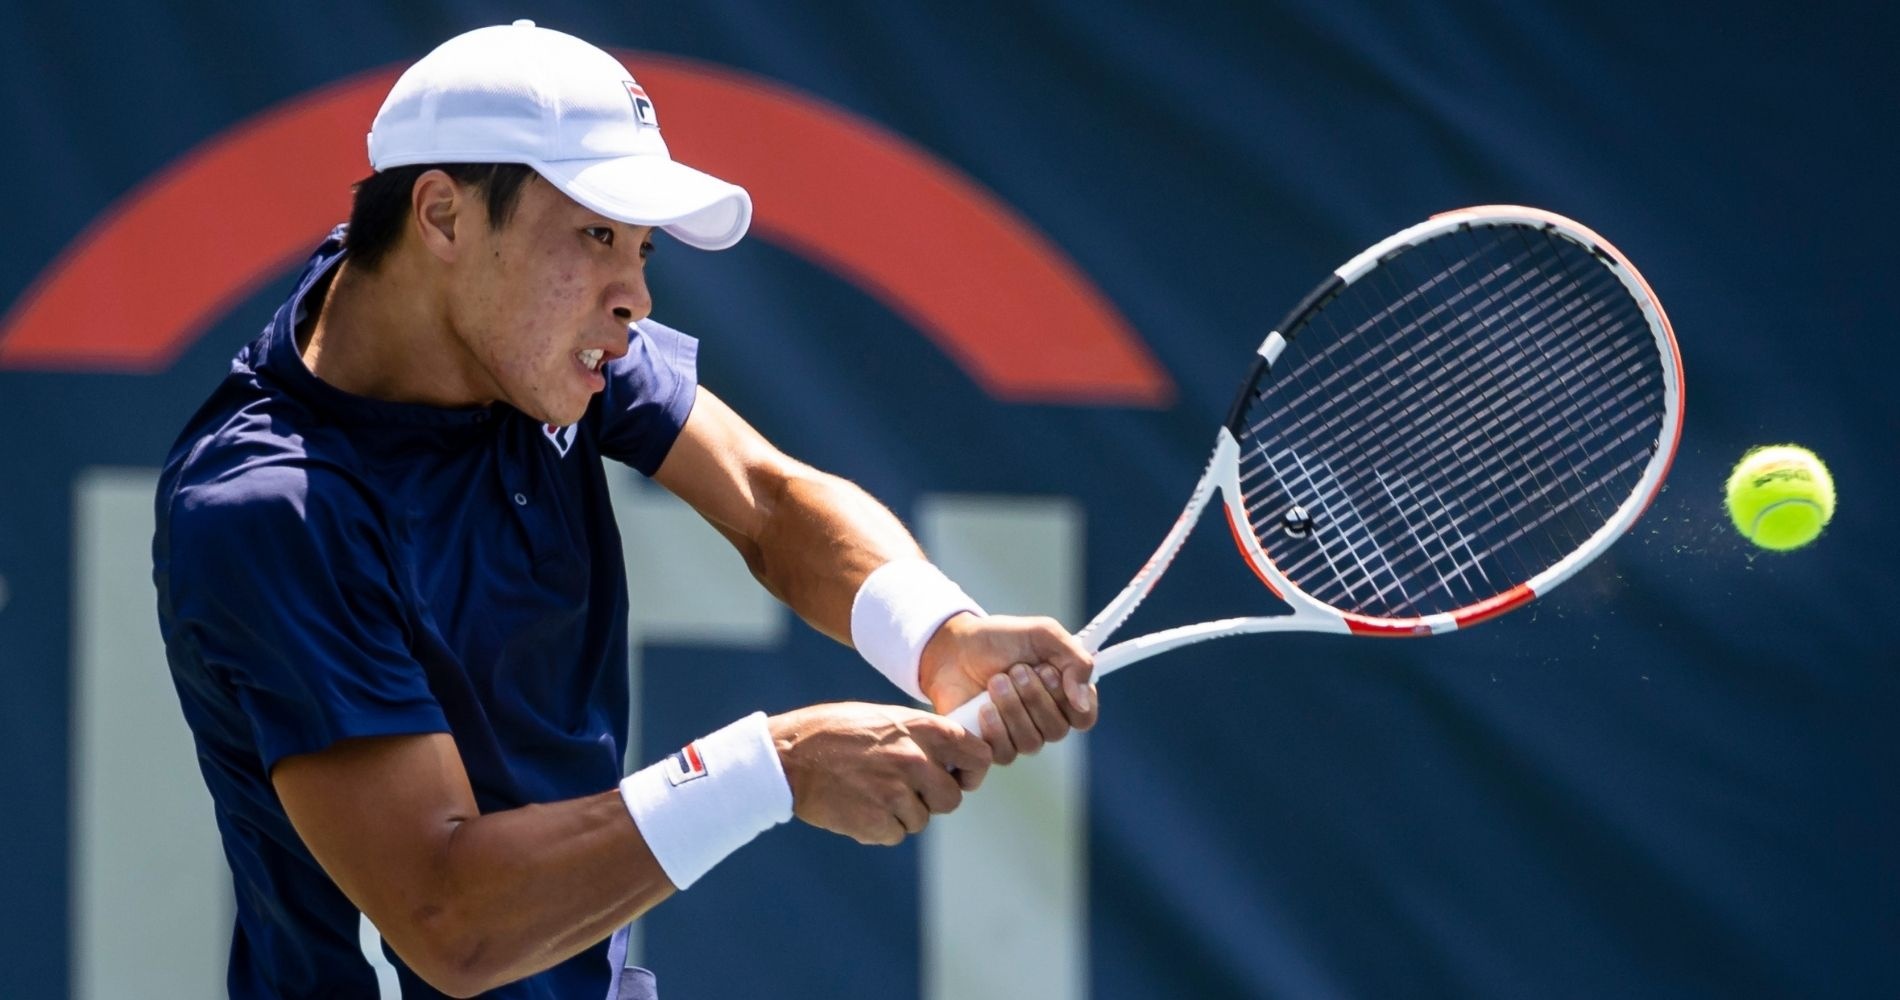 Tennis Everything you need to know about Brandon Nakashima